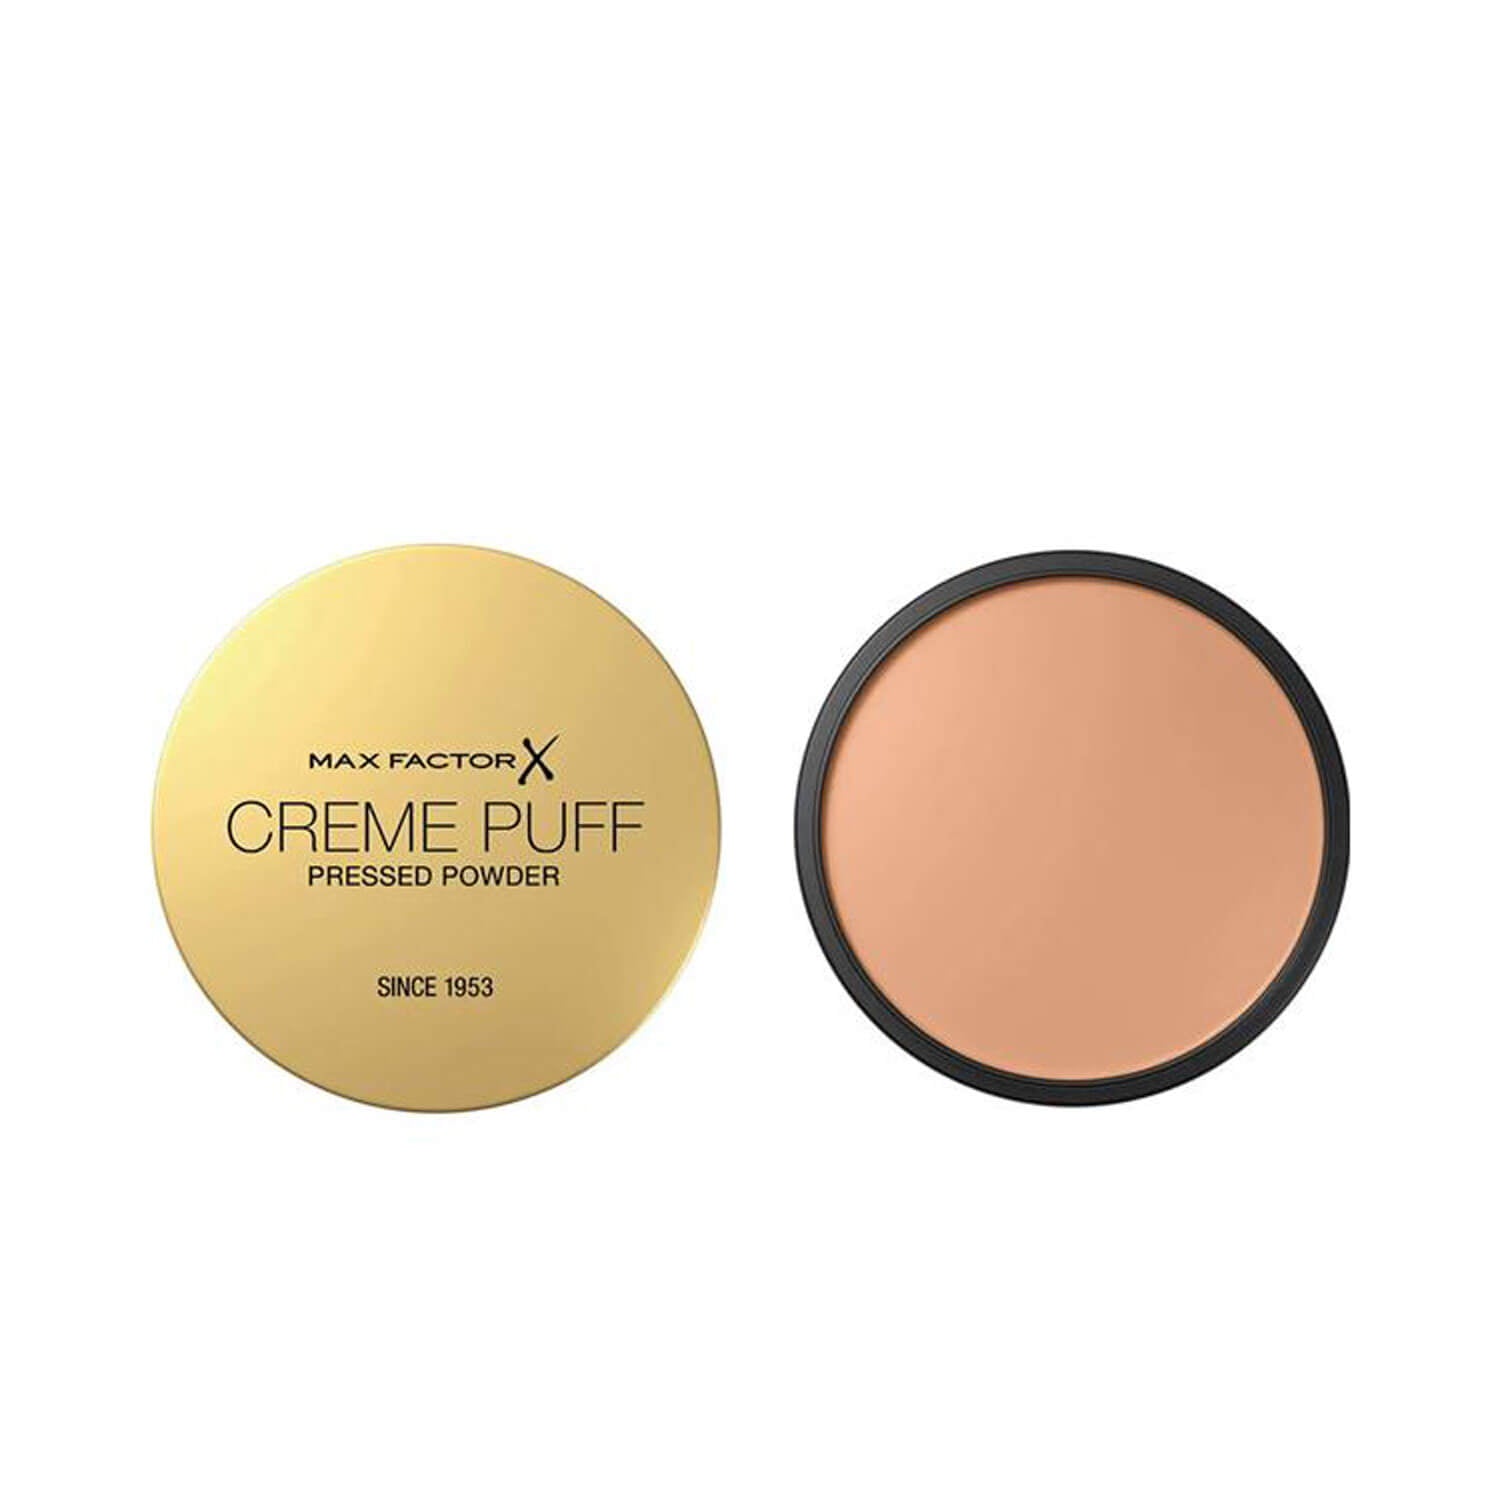 Max Factor Crème Puff Pressed Powder - Candle Glow 1 Shaws Department Stores